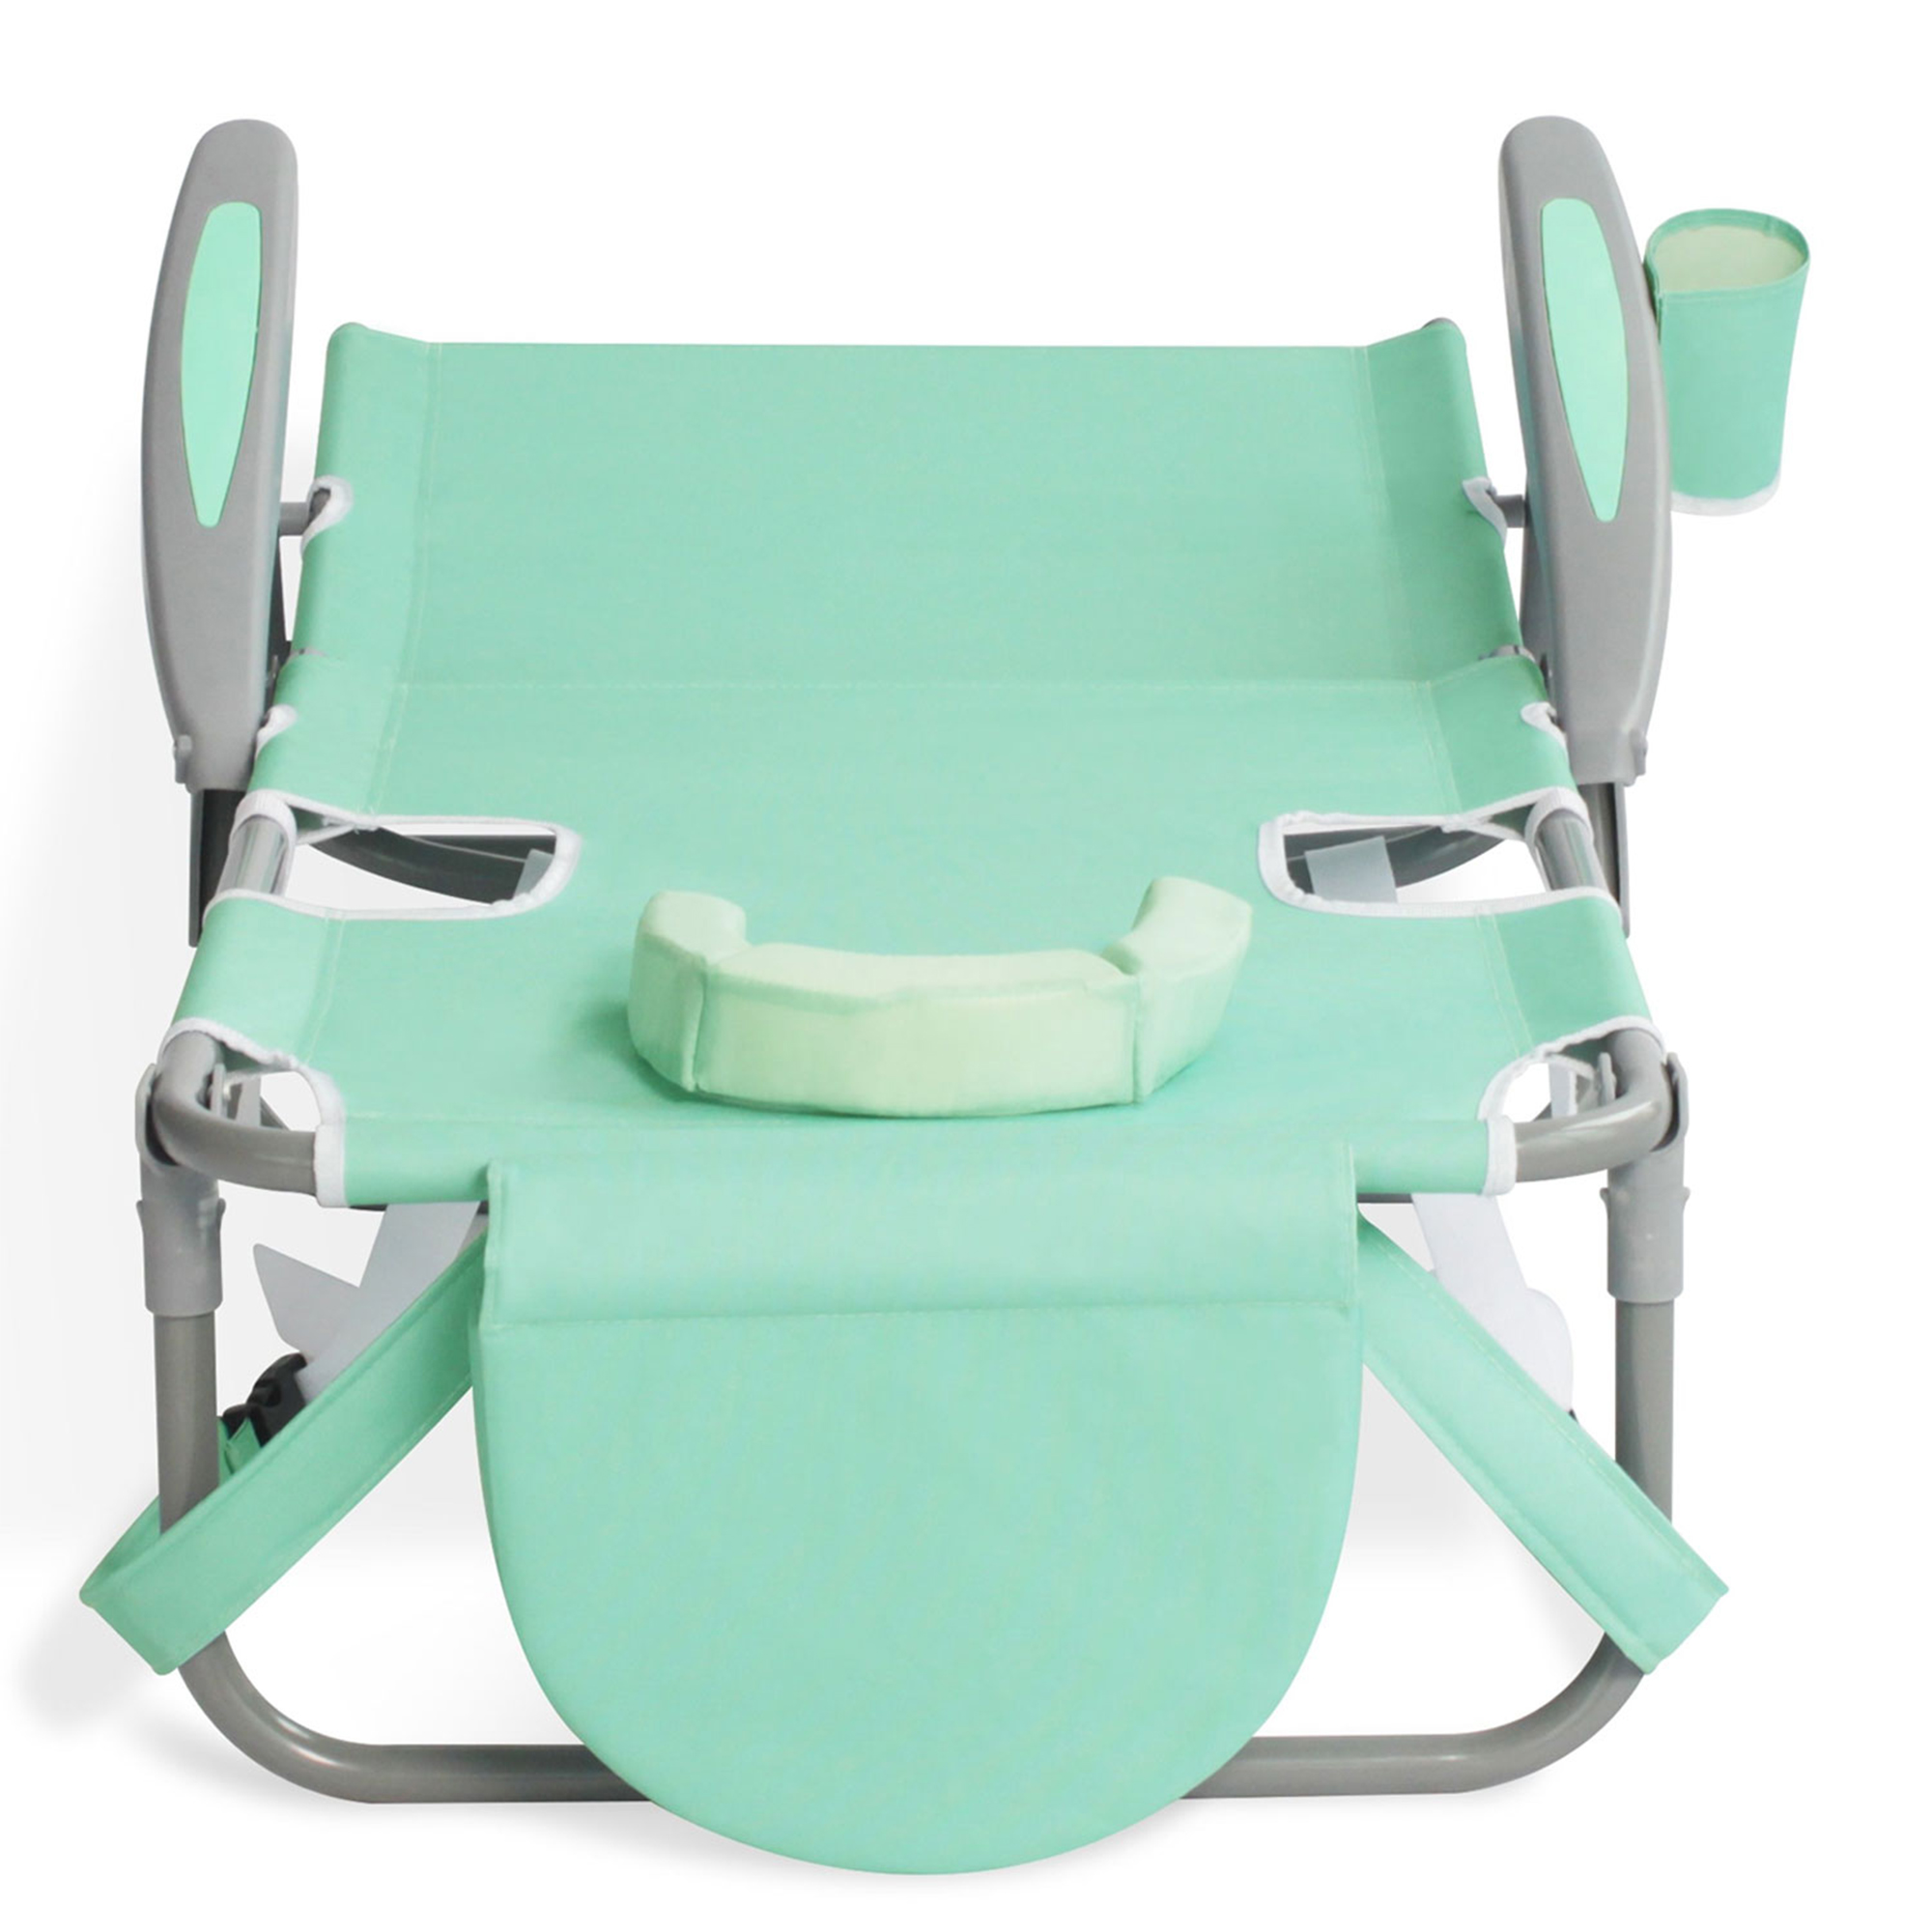 Ostrich On-Your-Back Outdoor Reclining Beach Pool Camping Chair, Teal - image 12 of 12